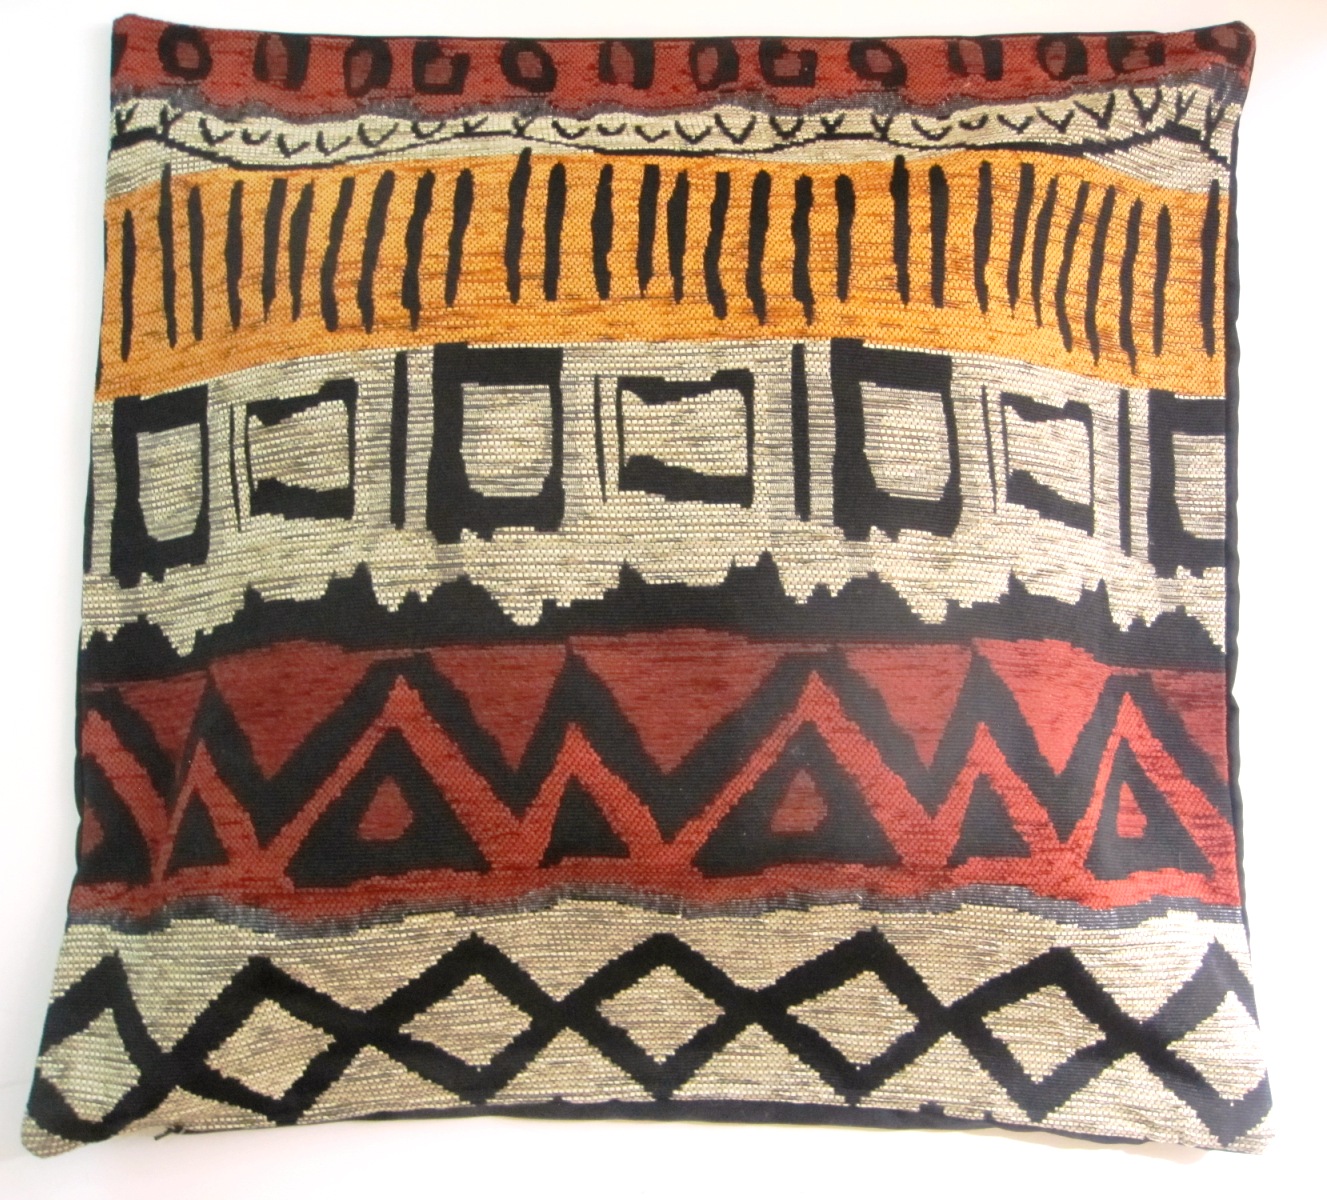 Hluhluwe Core Cushion Cover - 23 1/2" x 23 1/2"